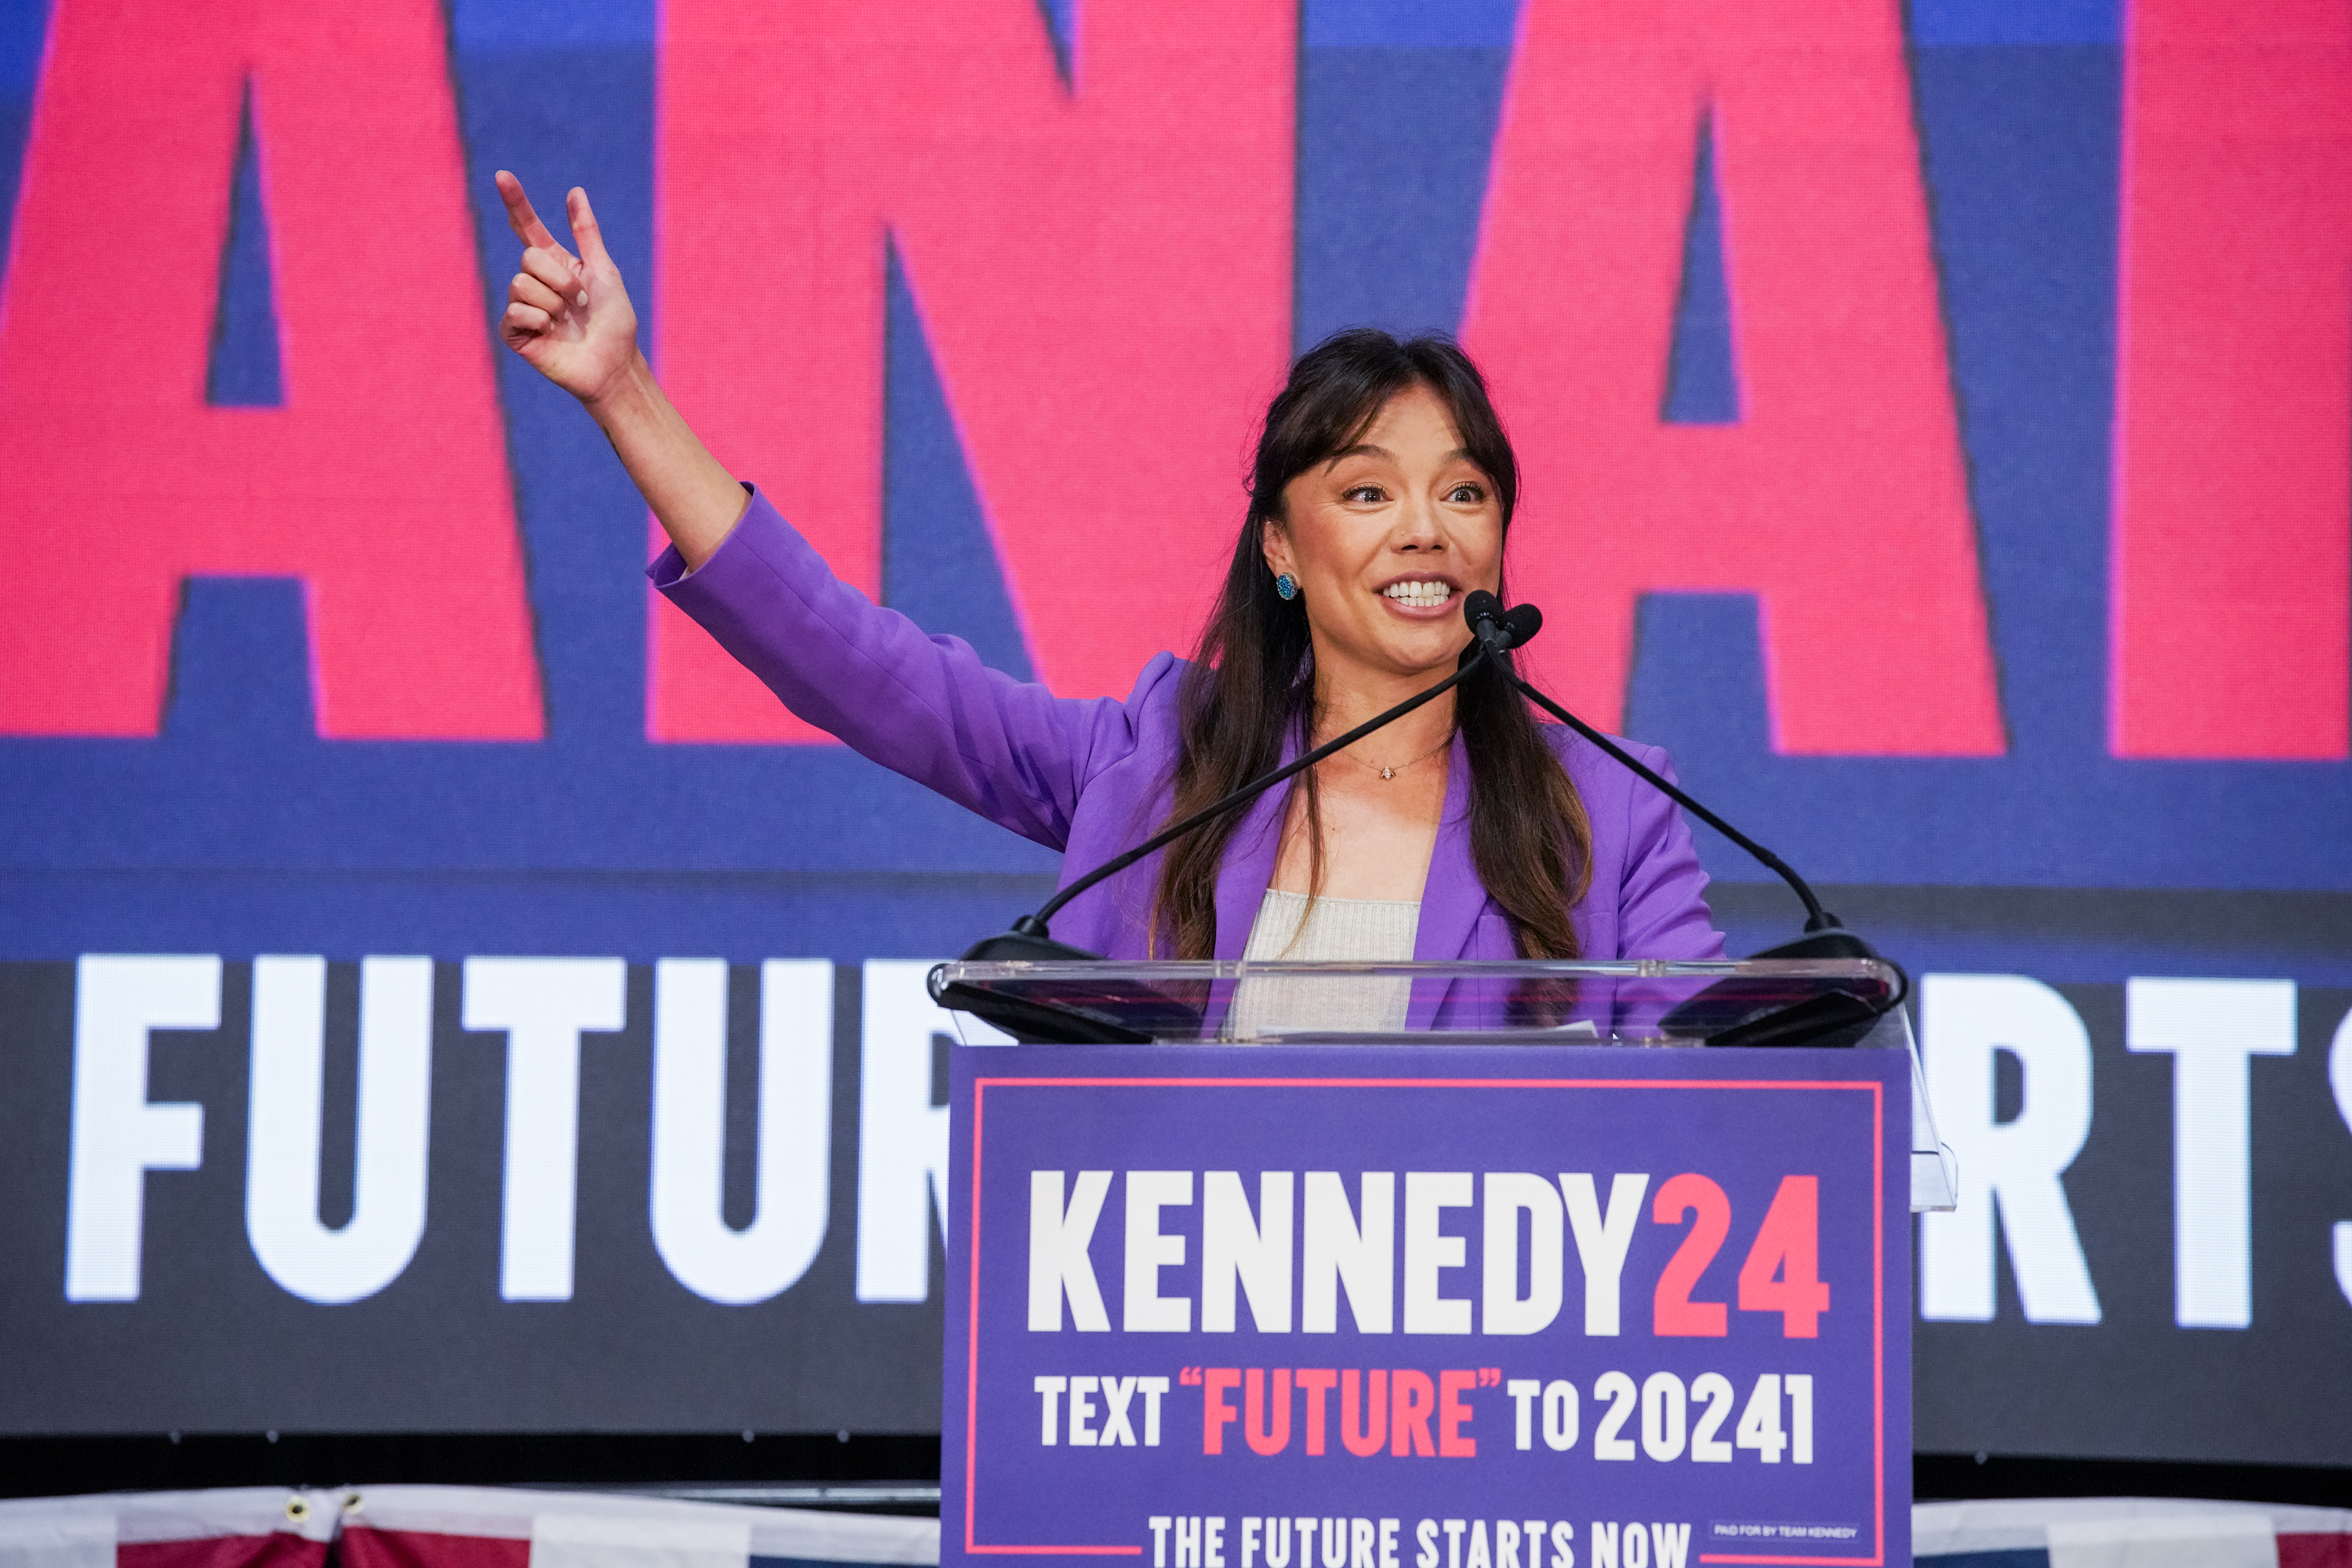 A smiling person in a purple suit behind a podium with &quot;KENNEDY 2024,&quot; raises a peace sign, with a &quot;FUTURE&quot; backdrop.